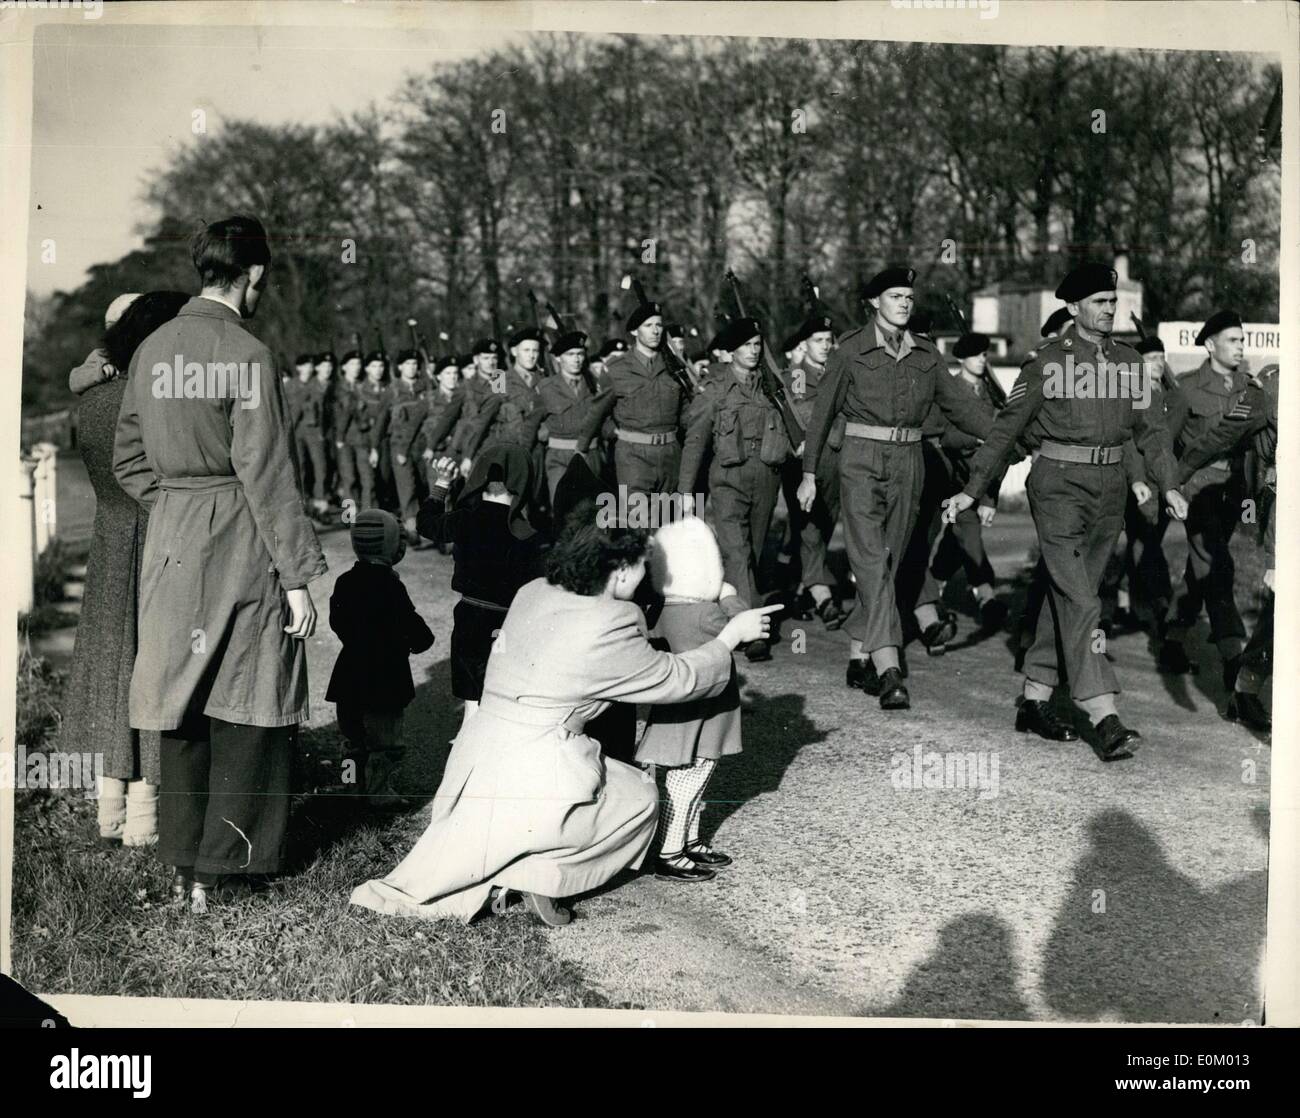 Dec. 12, 1952 - ''The Diehards'' Return: Officers and men of the First Battalion the Middlesex Regiment - ''The Diehards'', who Stock Photo